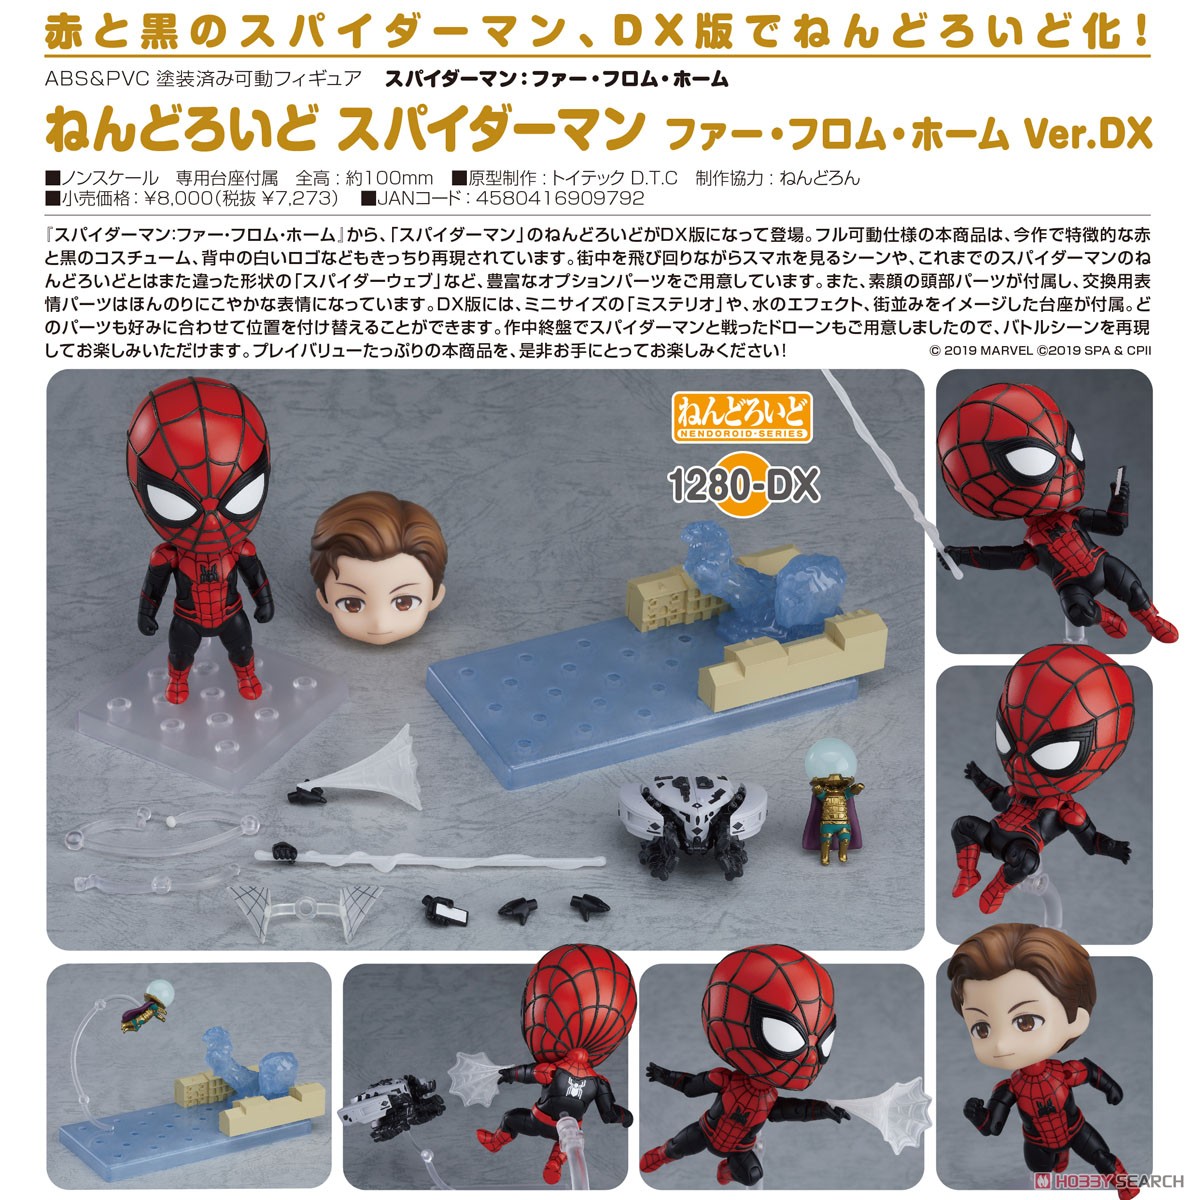 Nendoroid Spider-Man: Far From Home Ver.